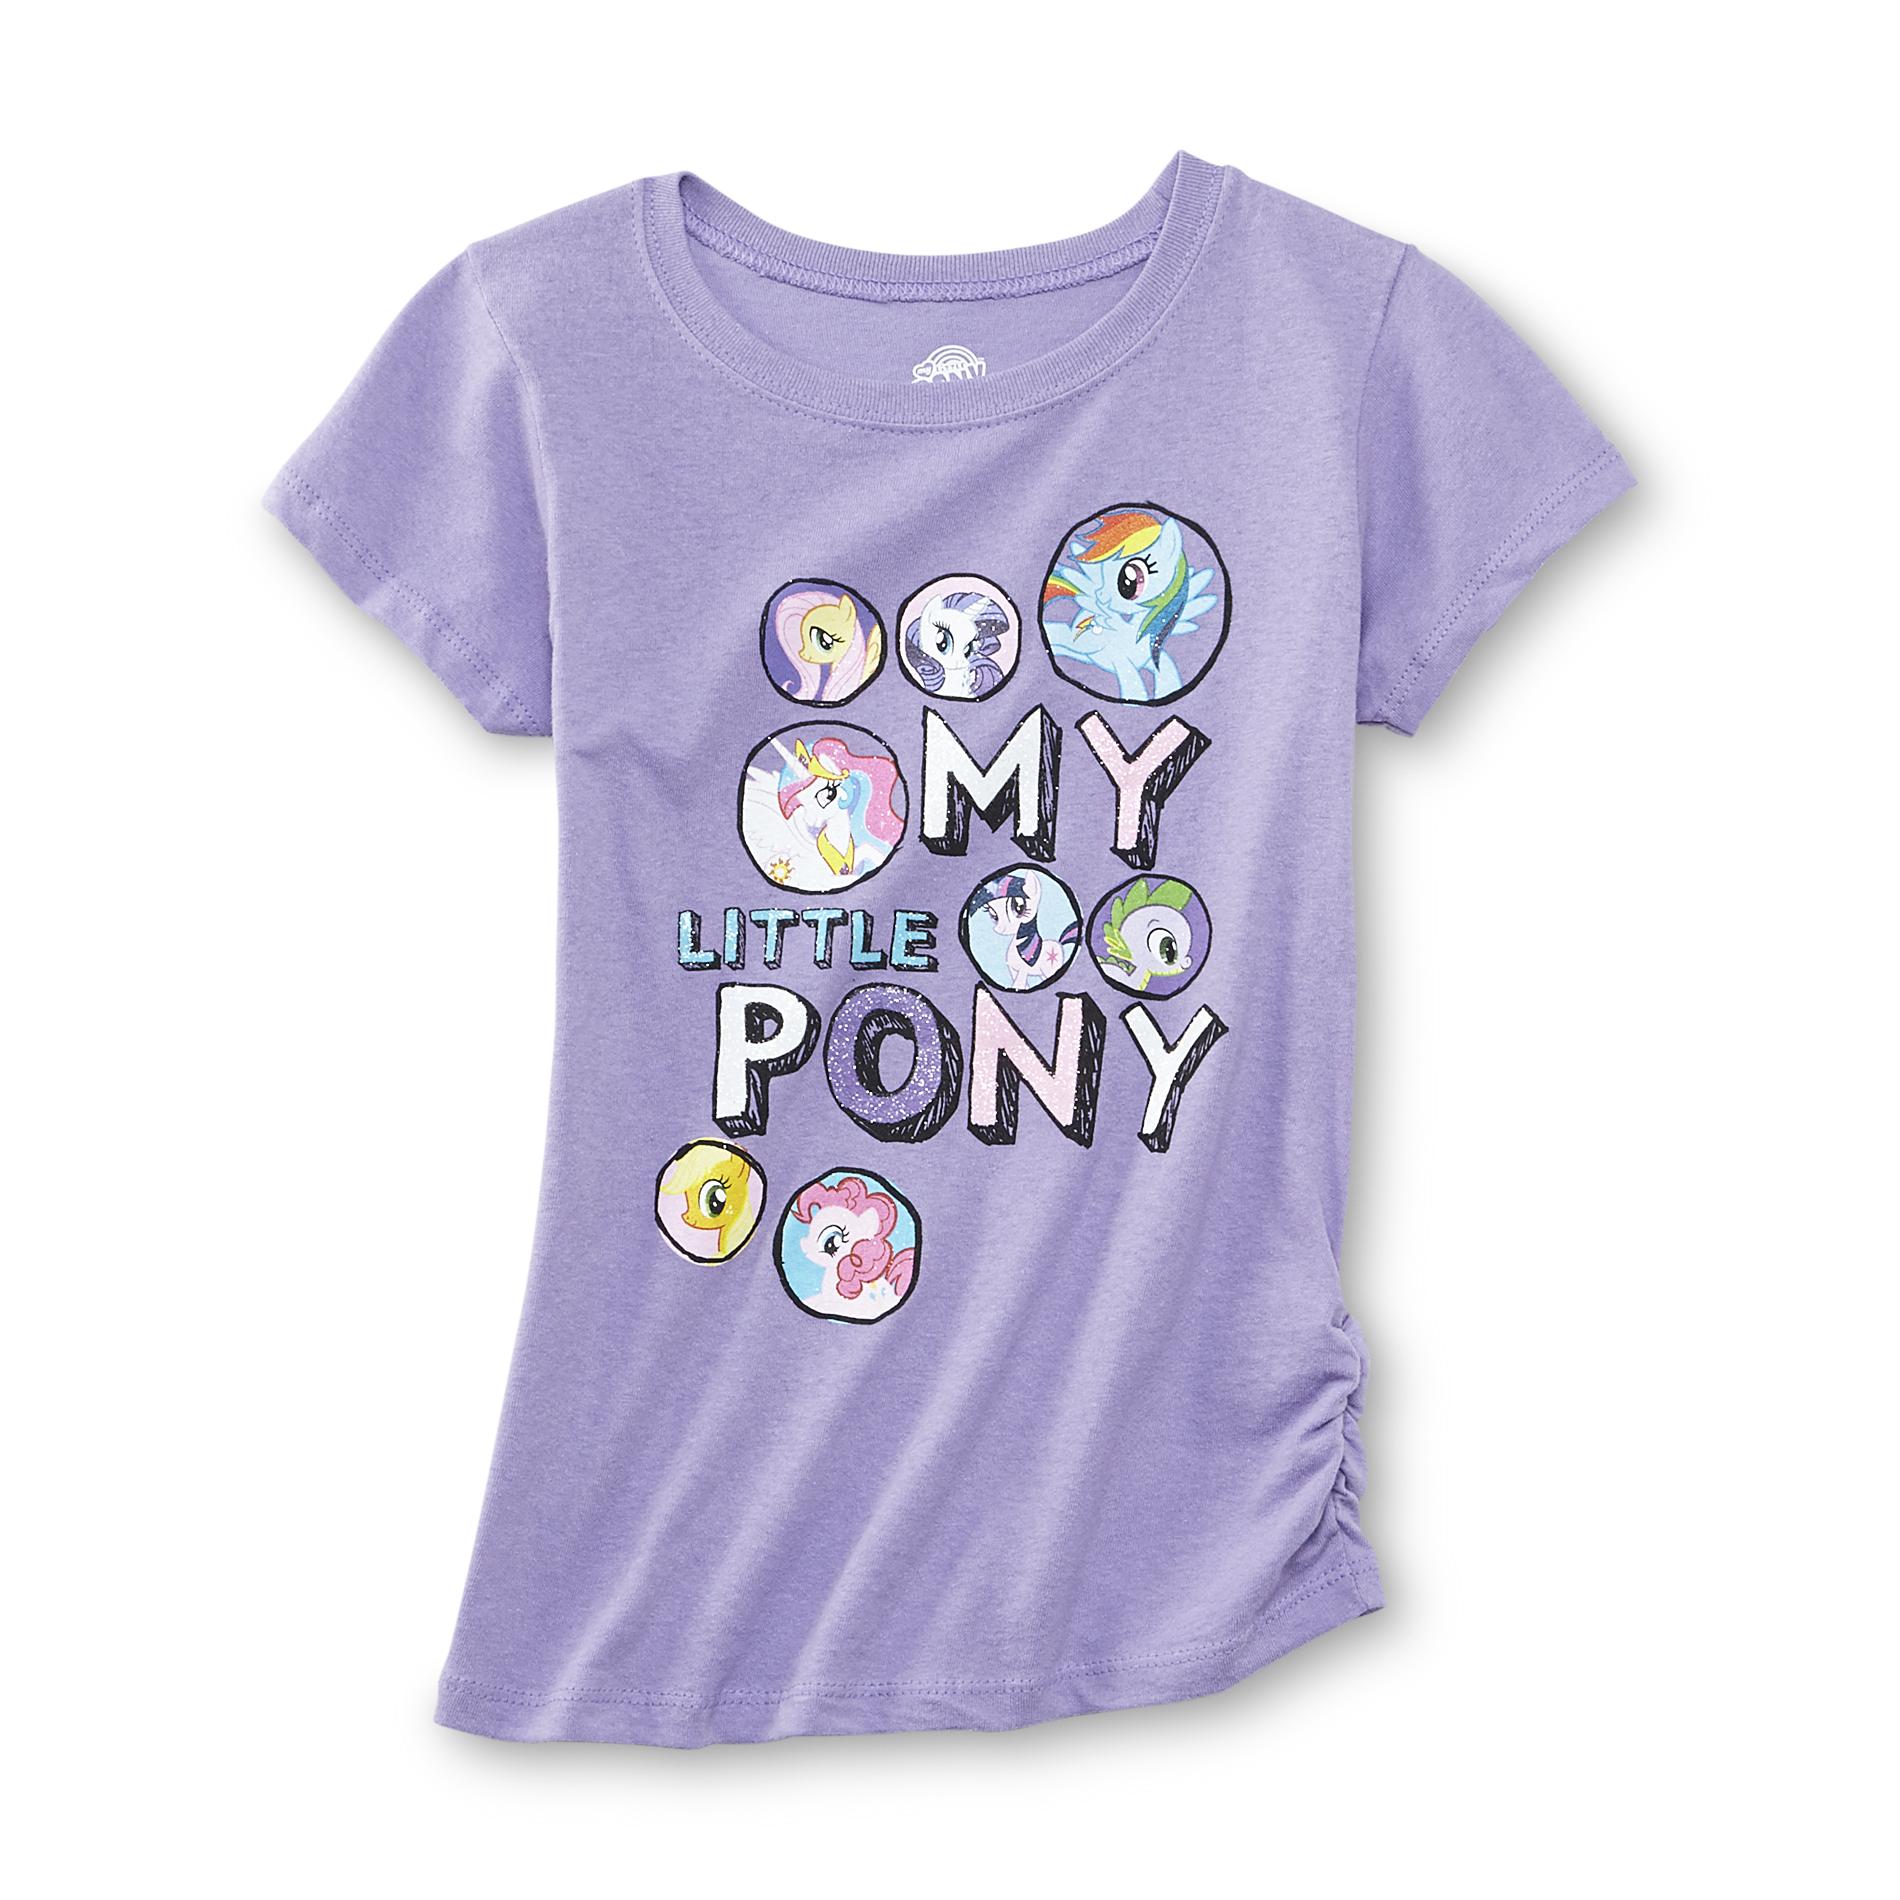 My Little Pony Girl's Graphic T-Shirt - Assorted Characters